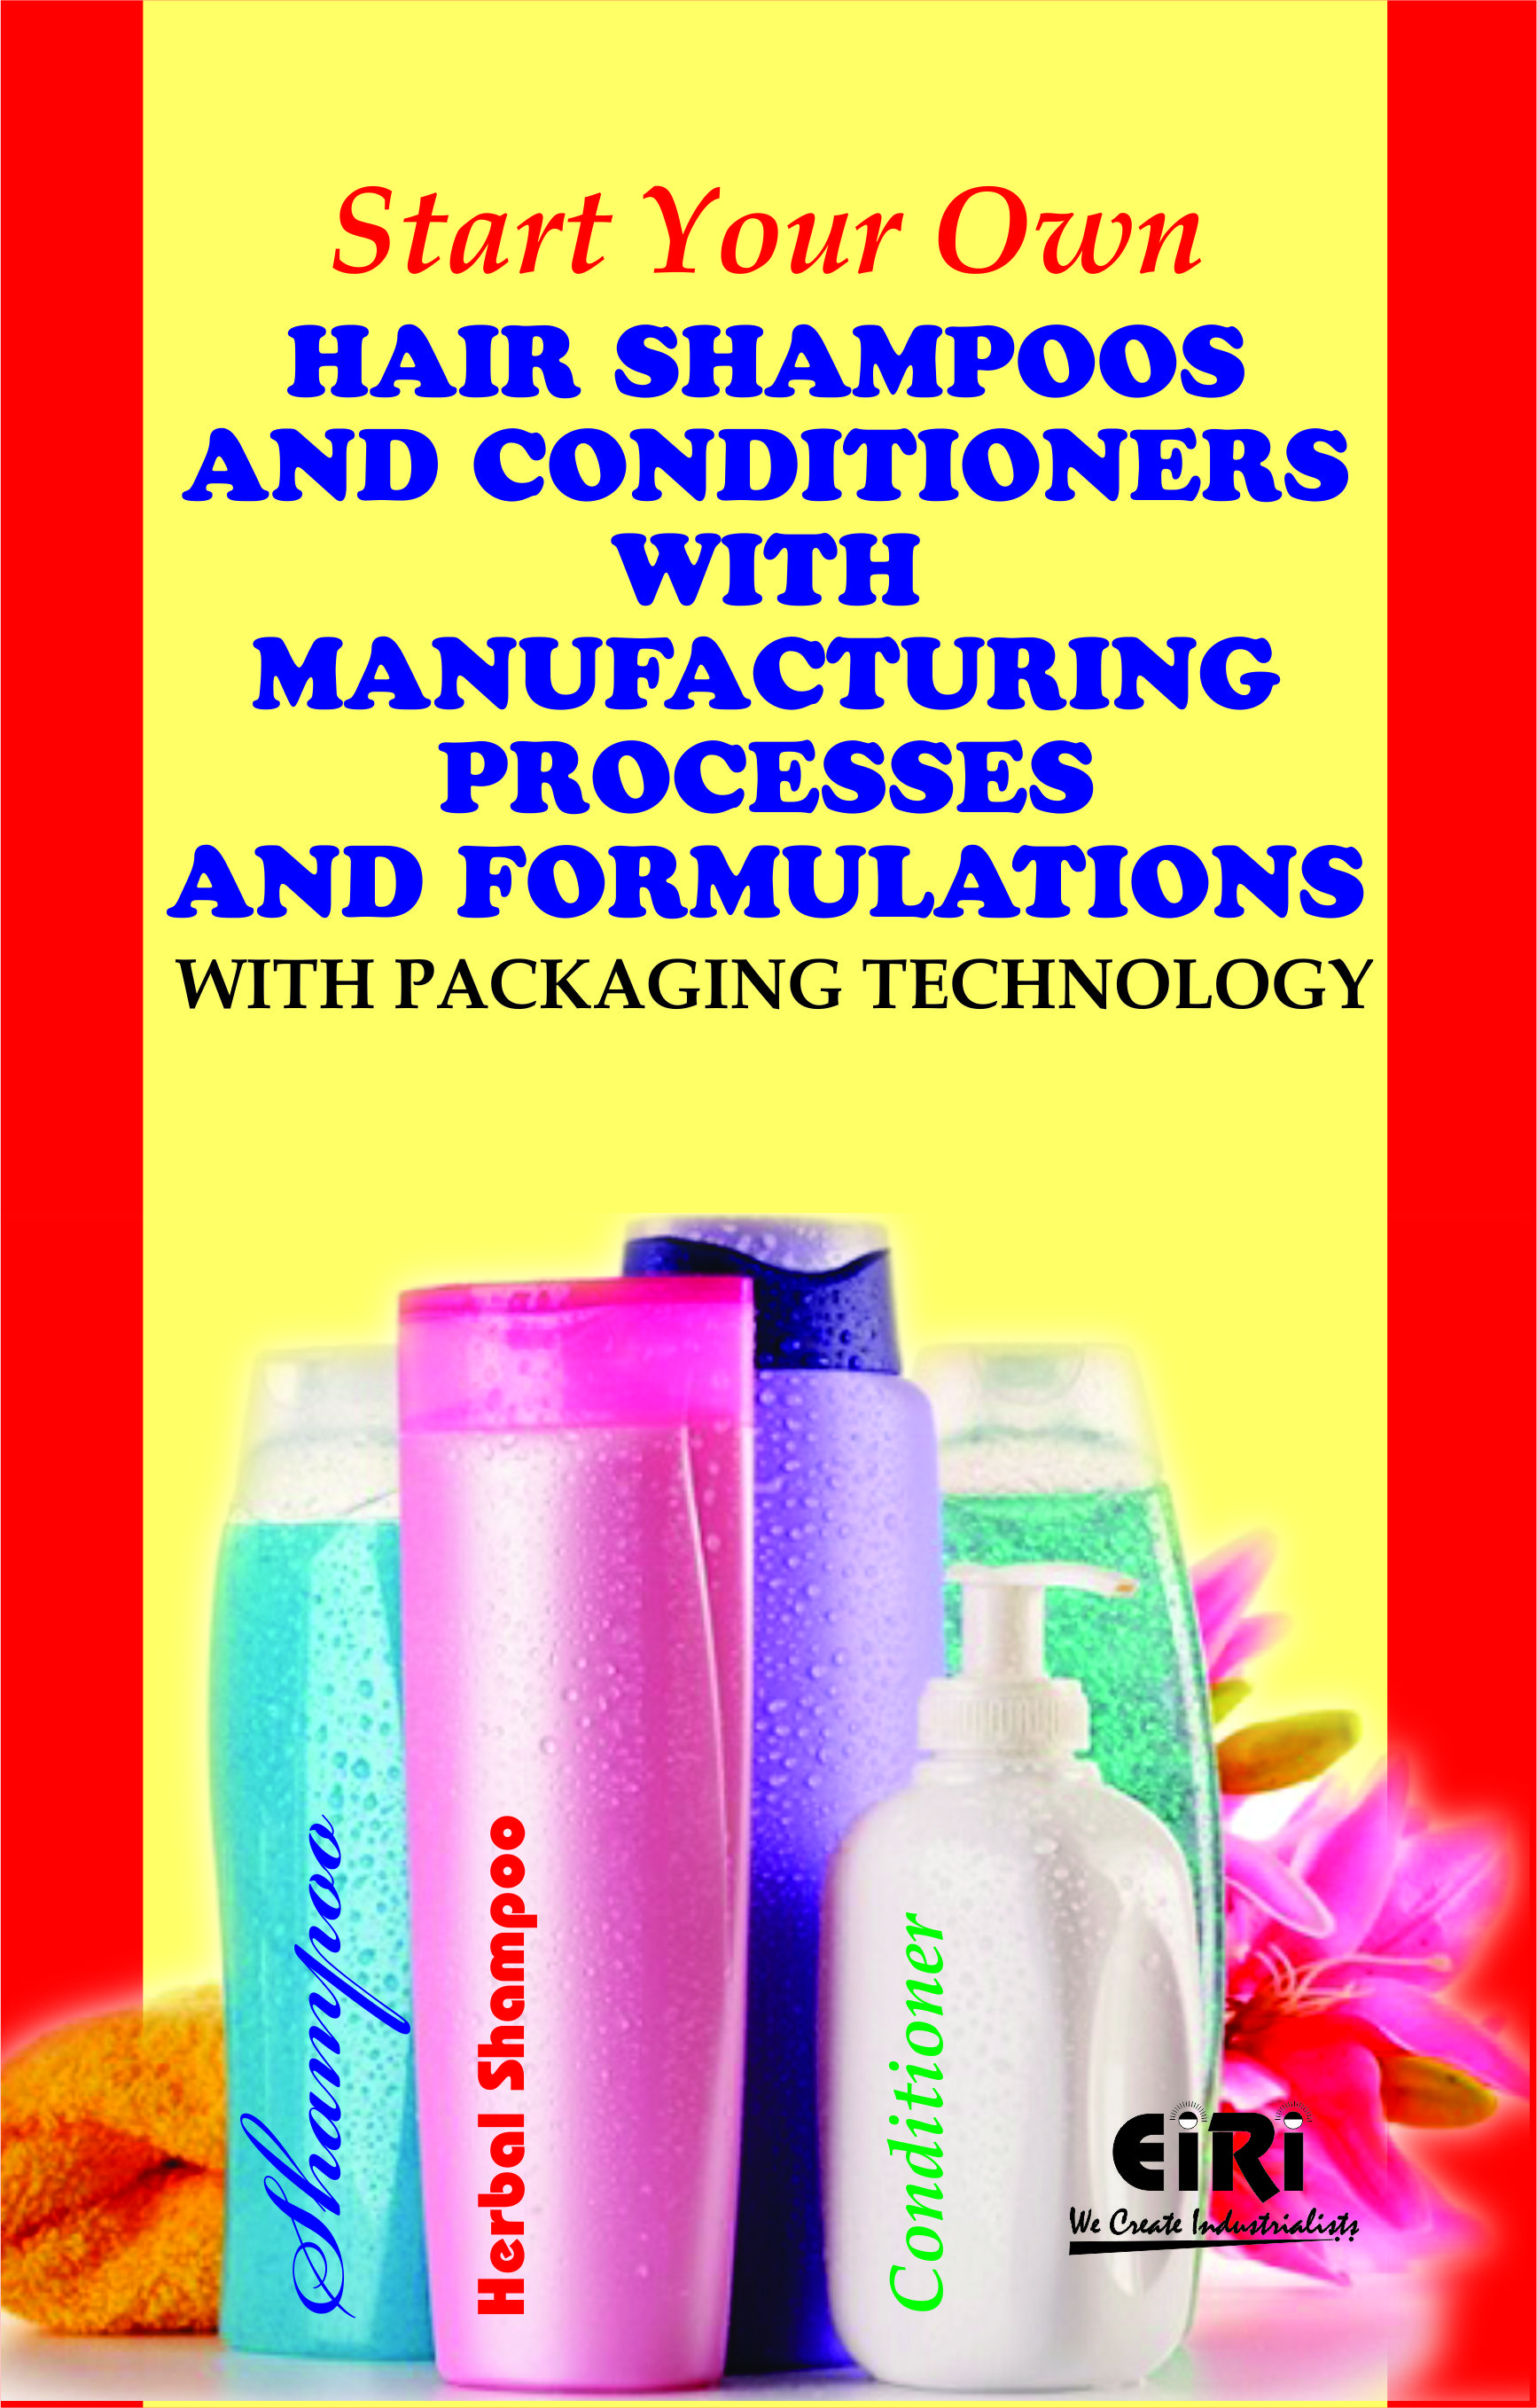 Handbook and Formulations on Hair Shampoos and Conditioners Manufacturing  with Processes & and Packaging Technology